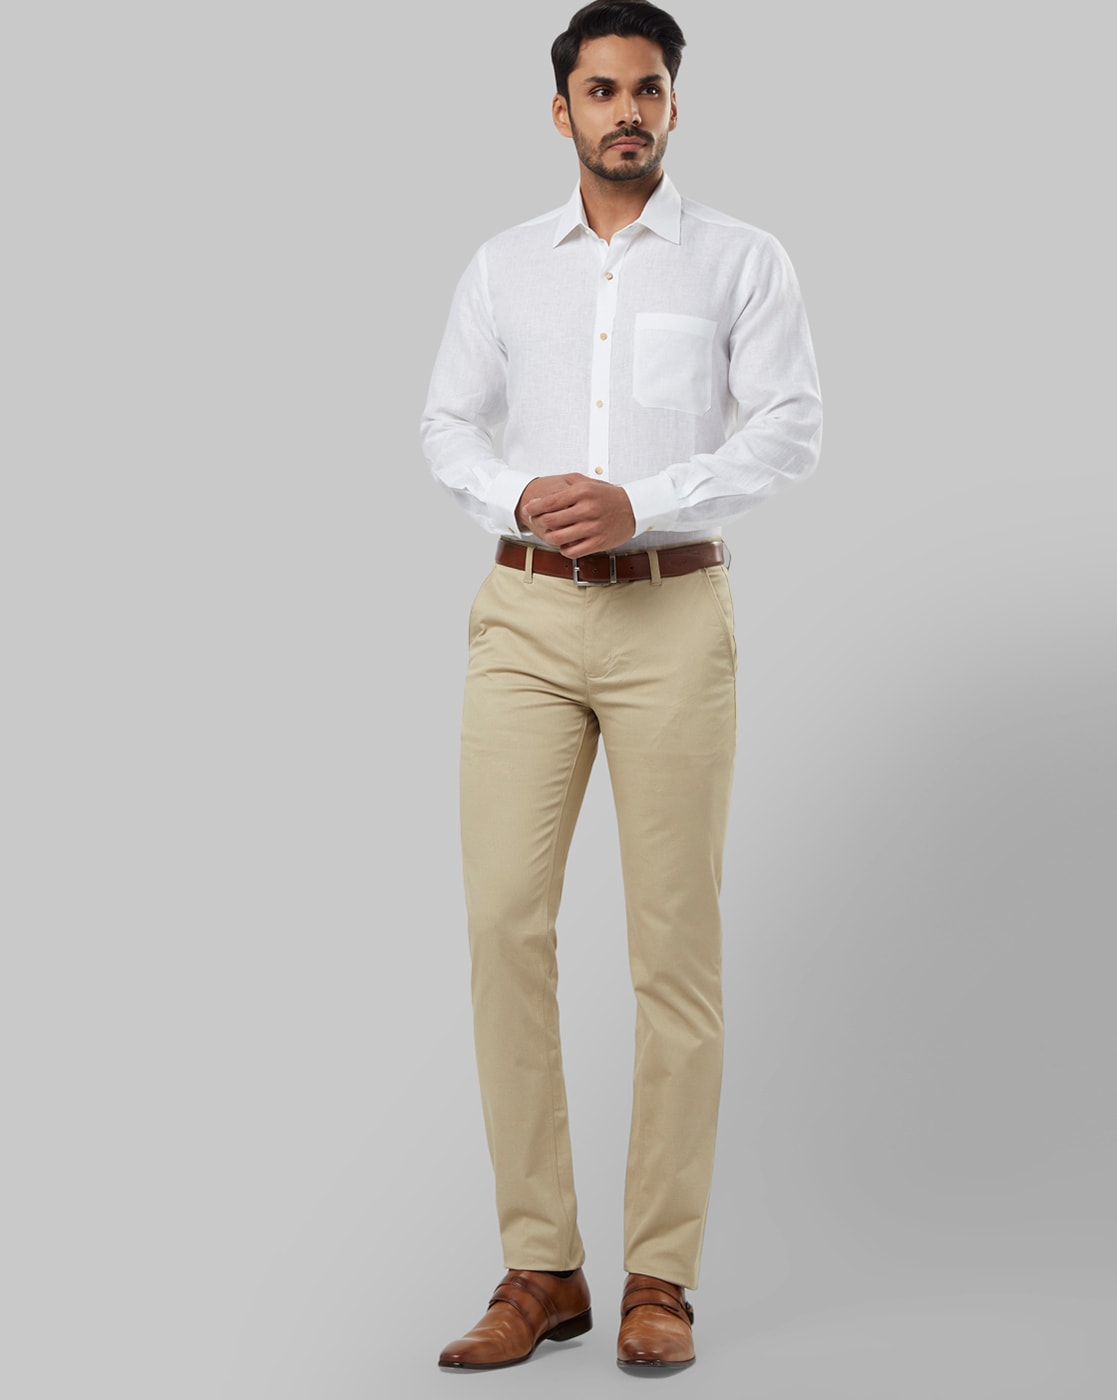 Grey Polo Shirt with Beige Pants | Hockerty